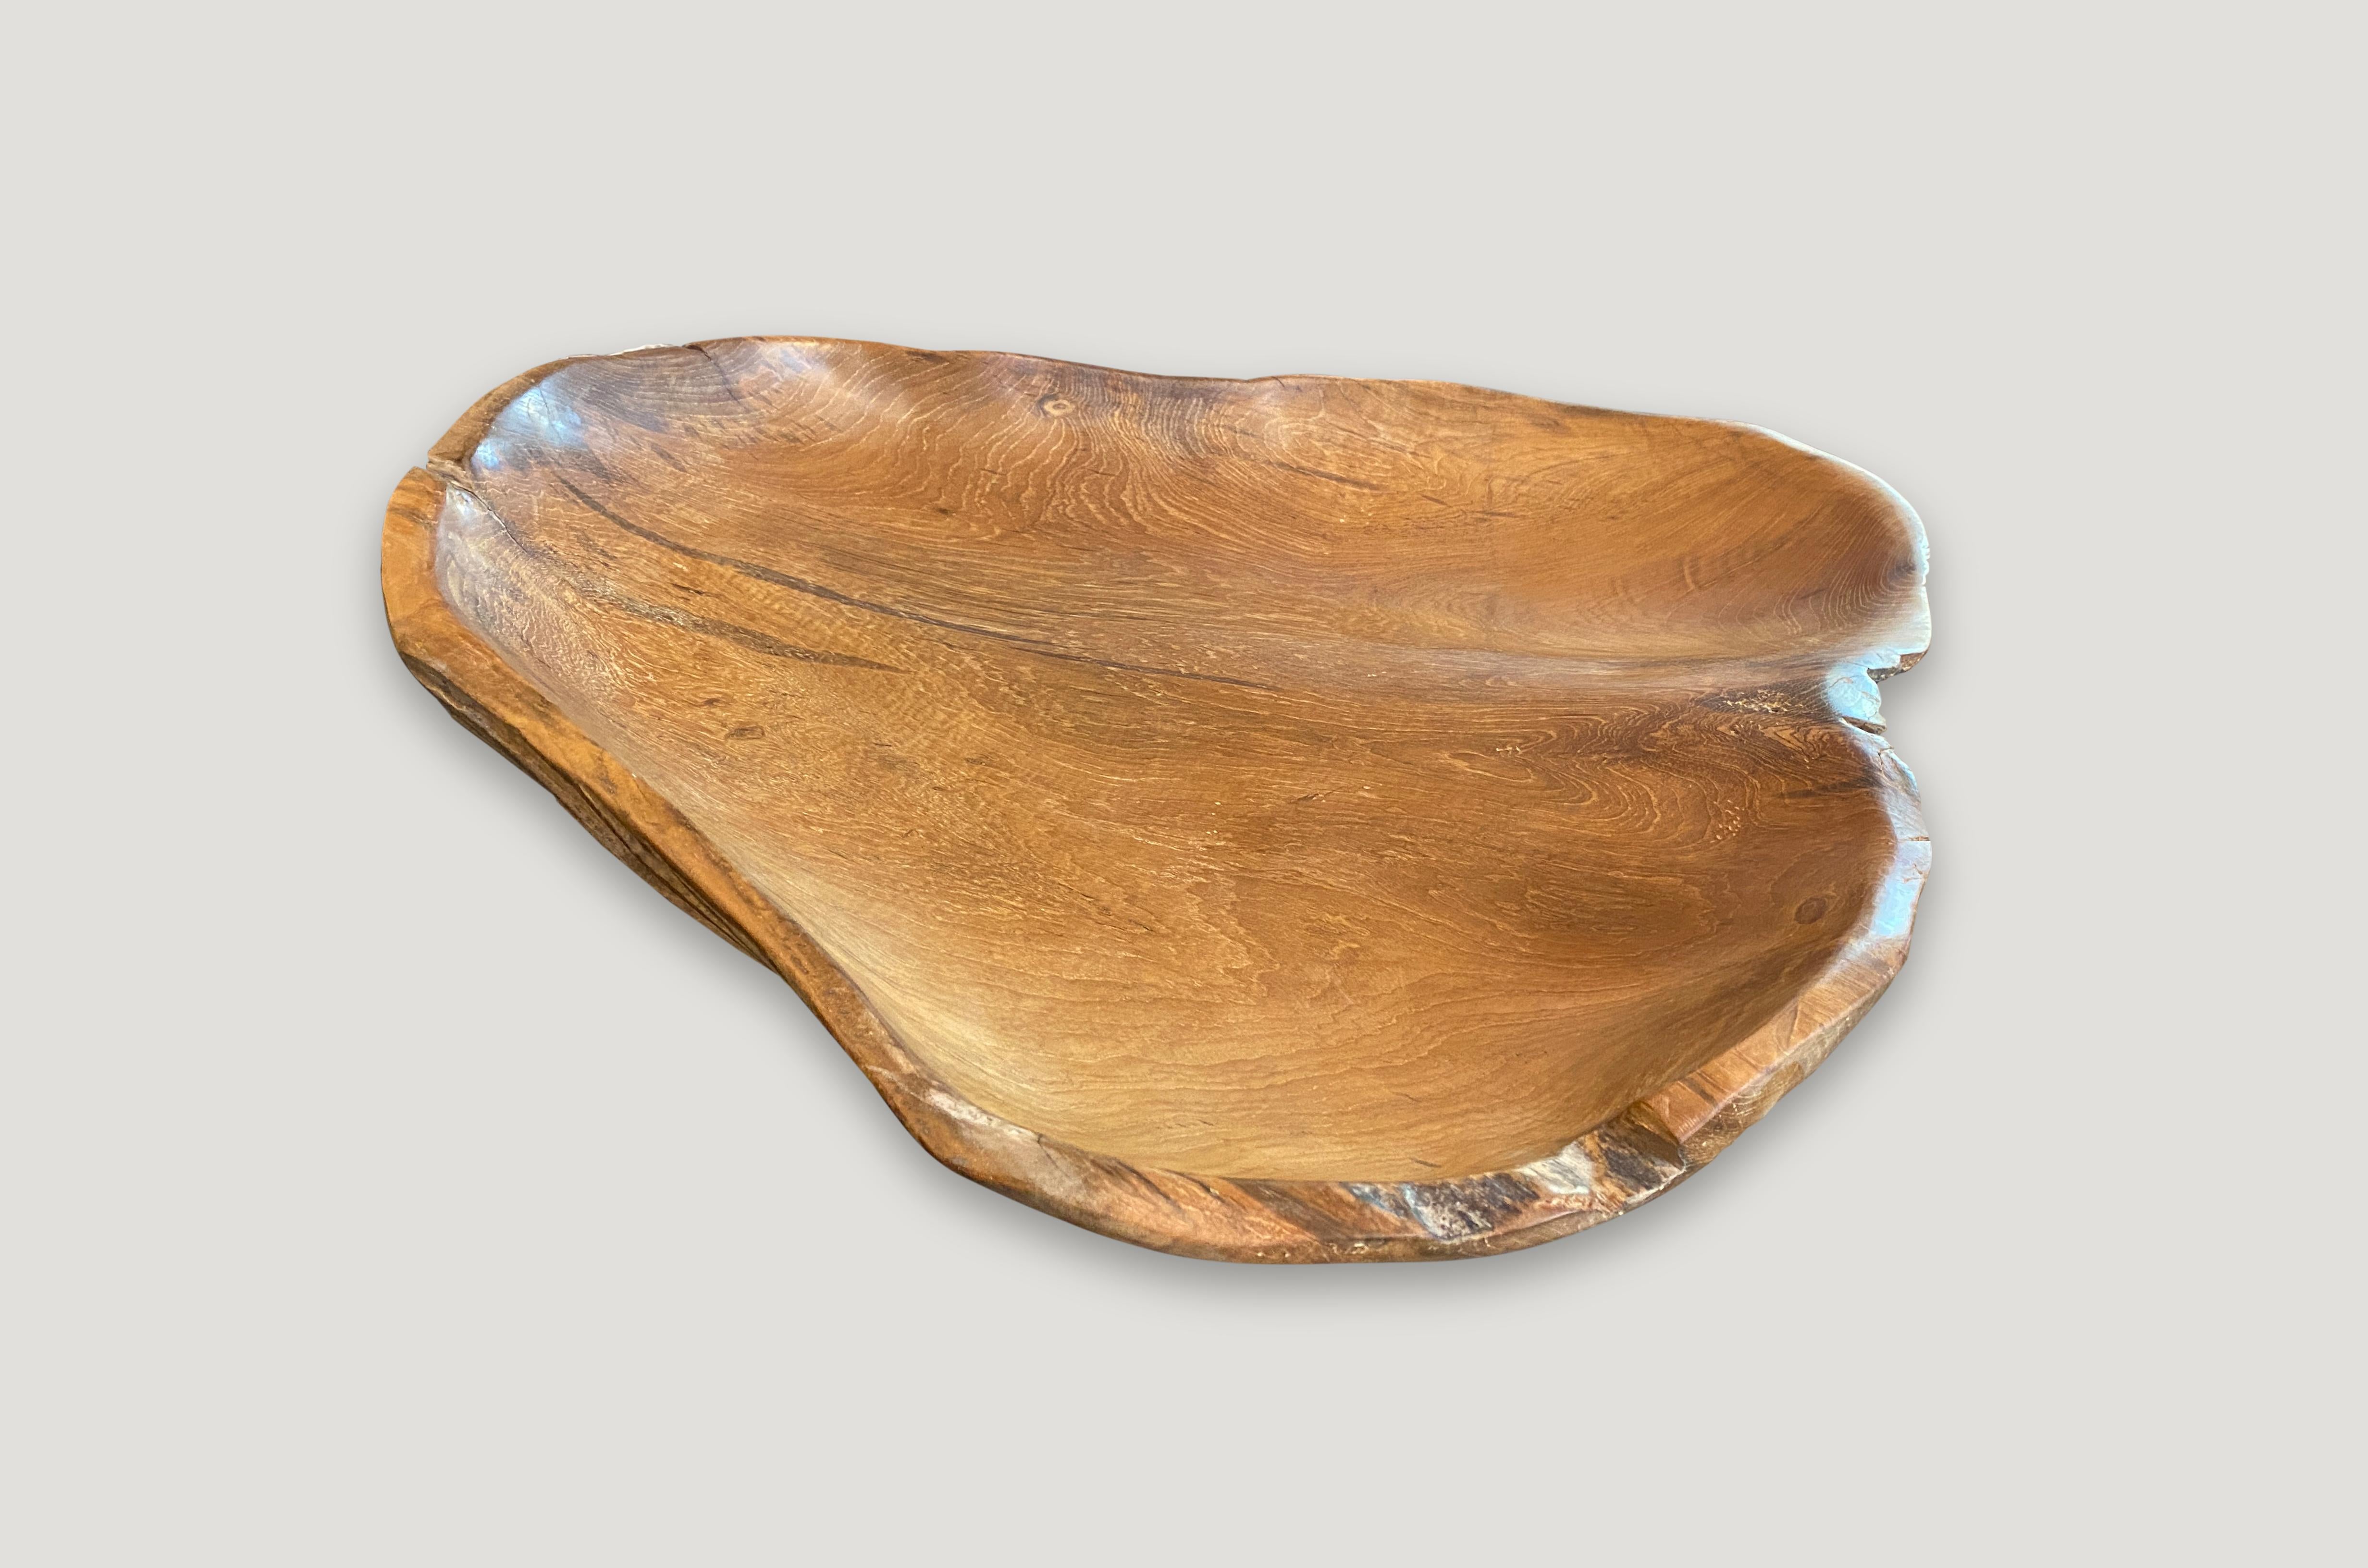 Beautiful grain on this Minimalist teak bowl, hand carved from a single piece of reclaimed teak wood.

Andrianna Shamaris. The Leader In Modern Organic Design™